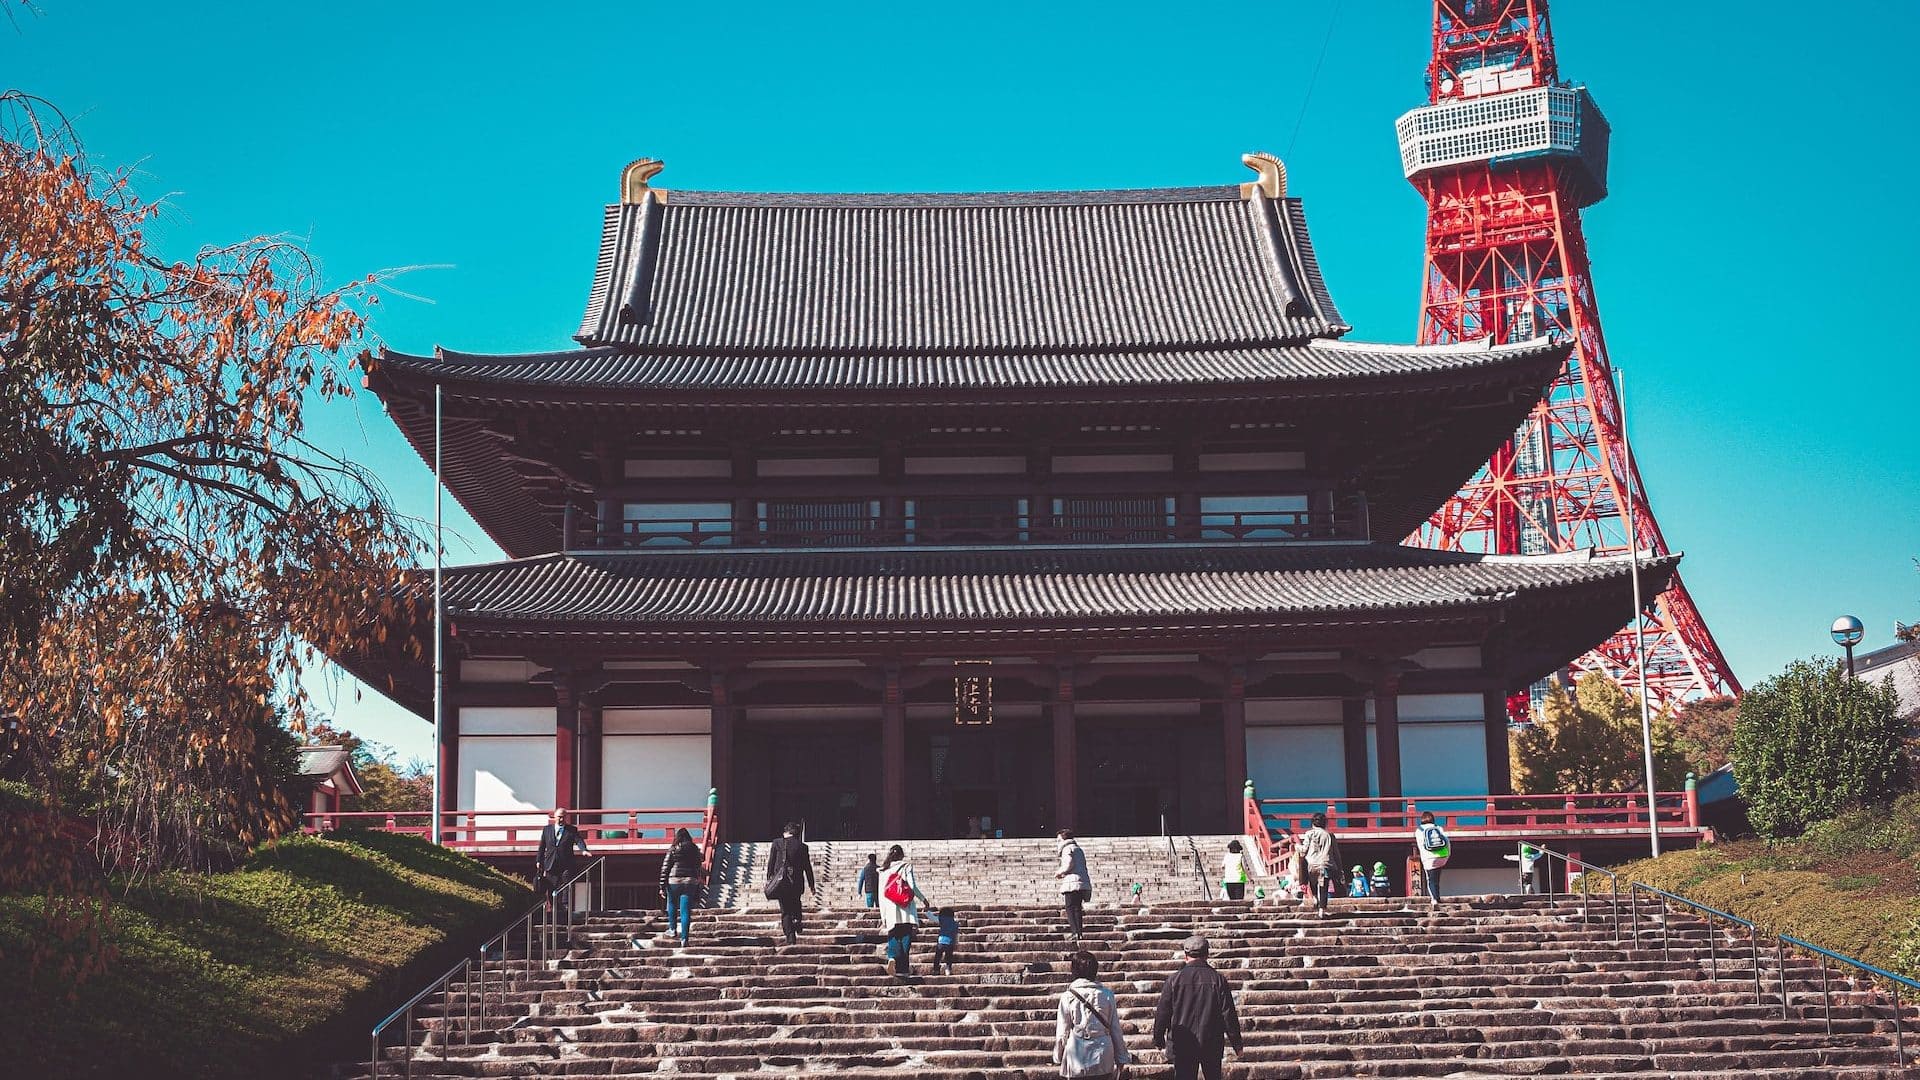 Sengakuji Temple and Zojoji Temple are located in this area